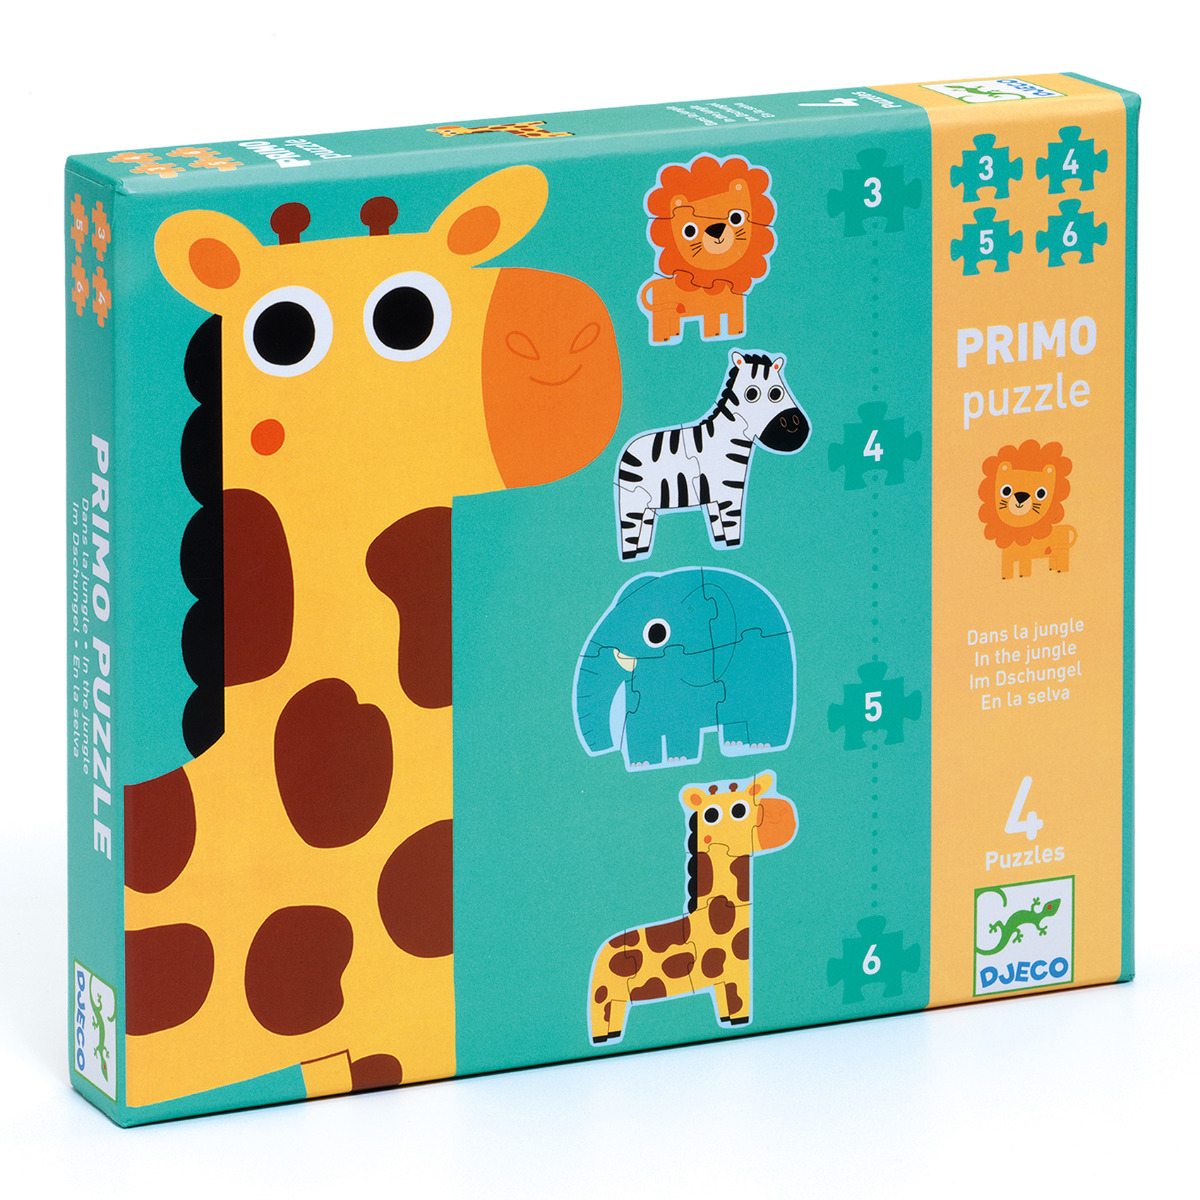 In the Jungle Jigsaw Puzzle (Age +12months)